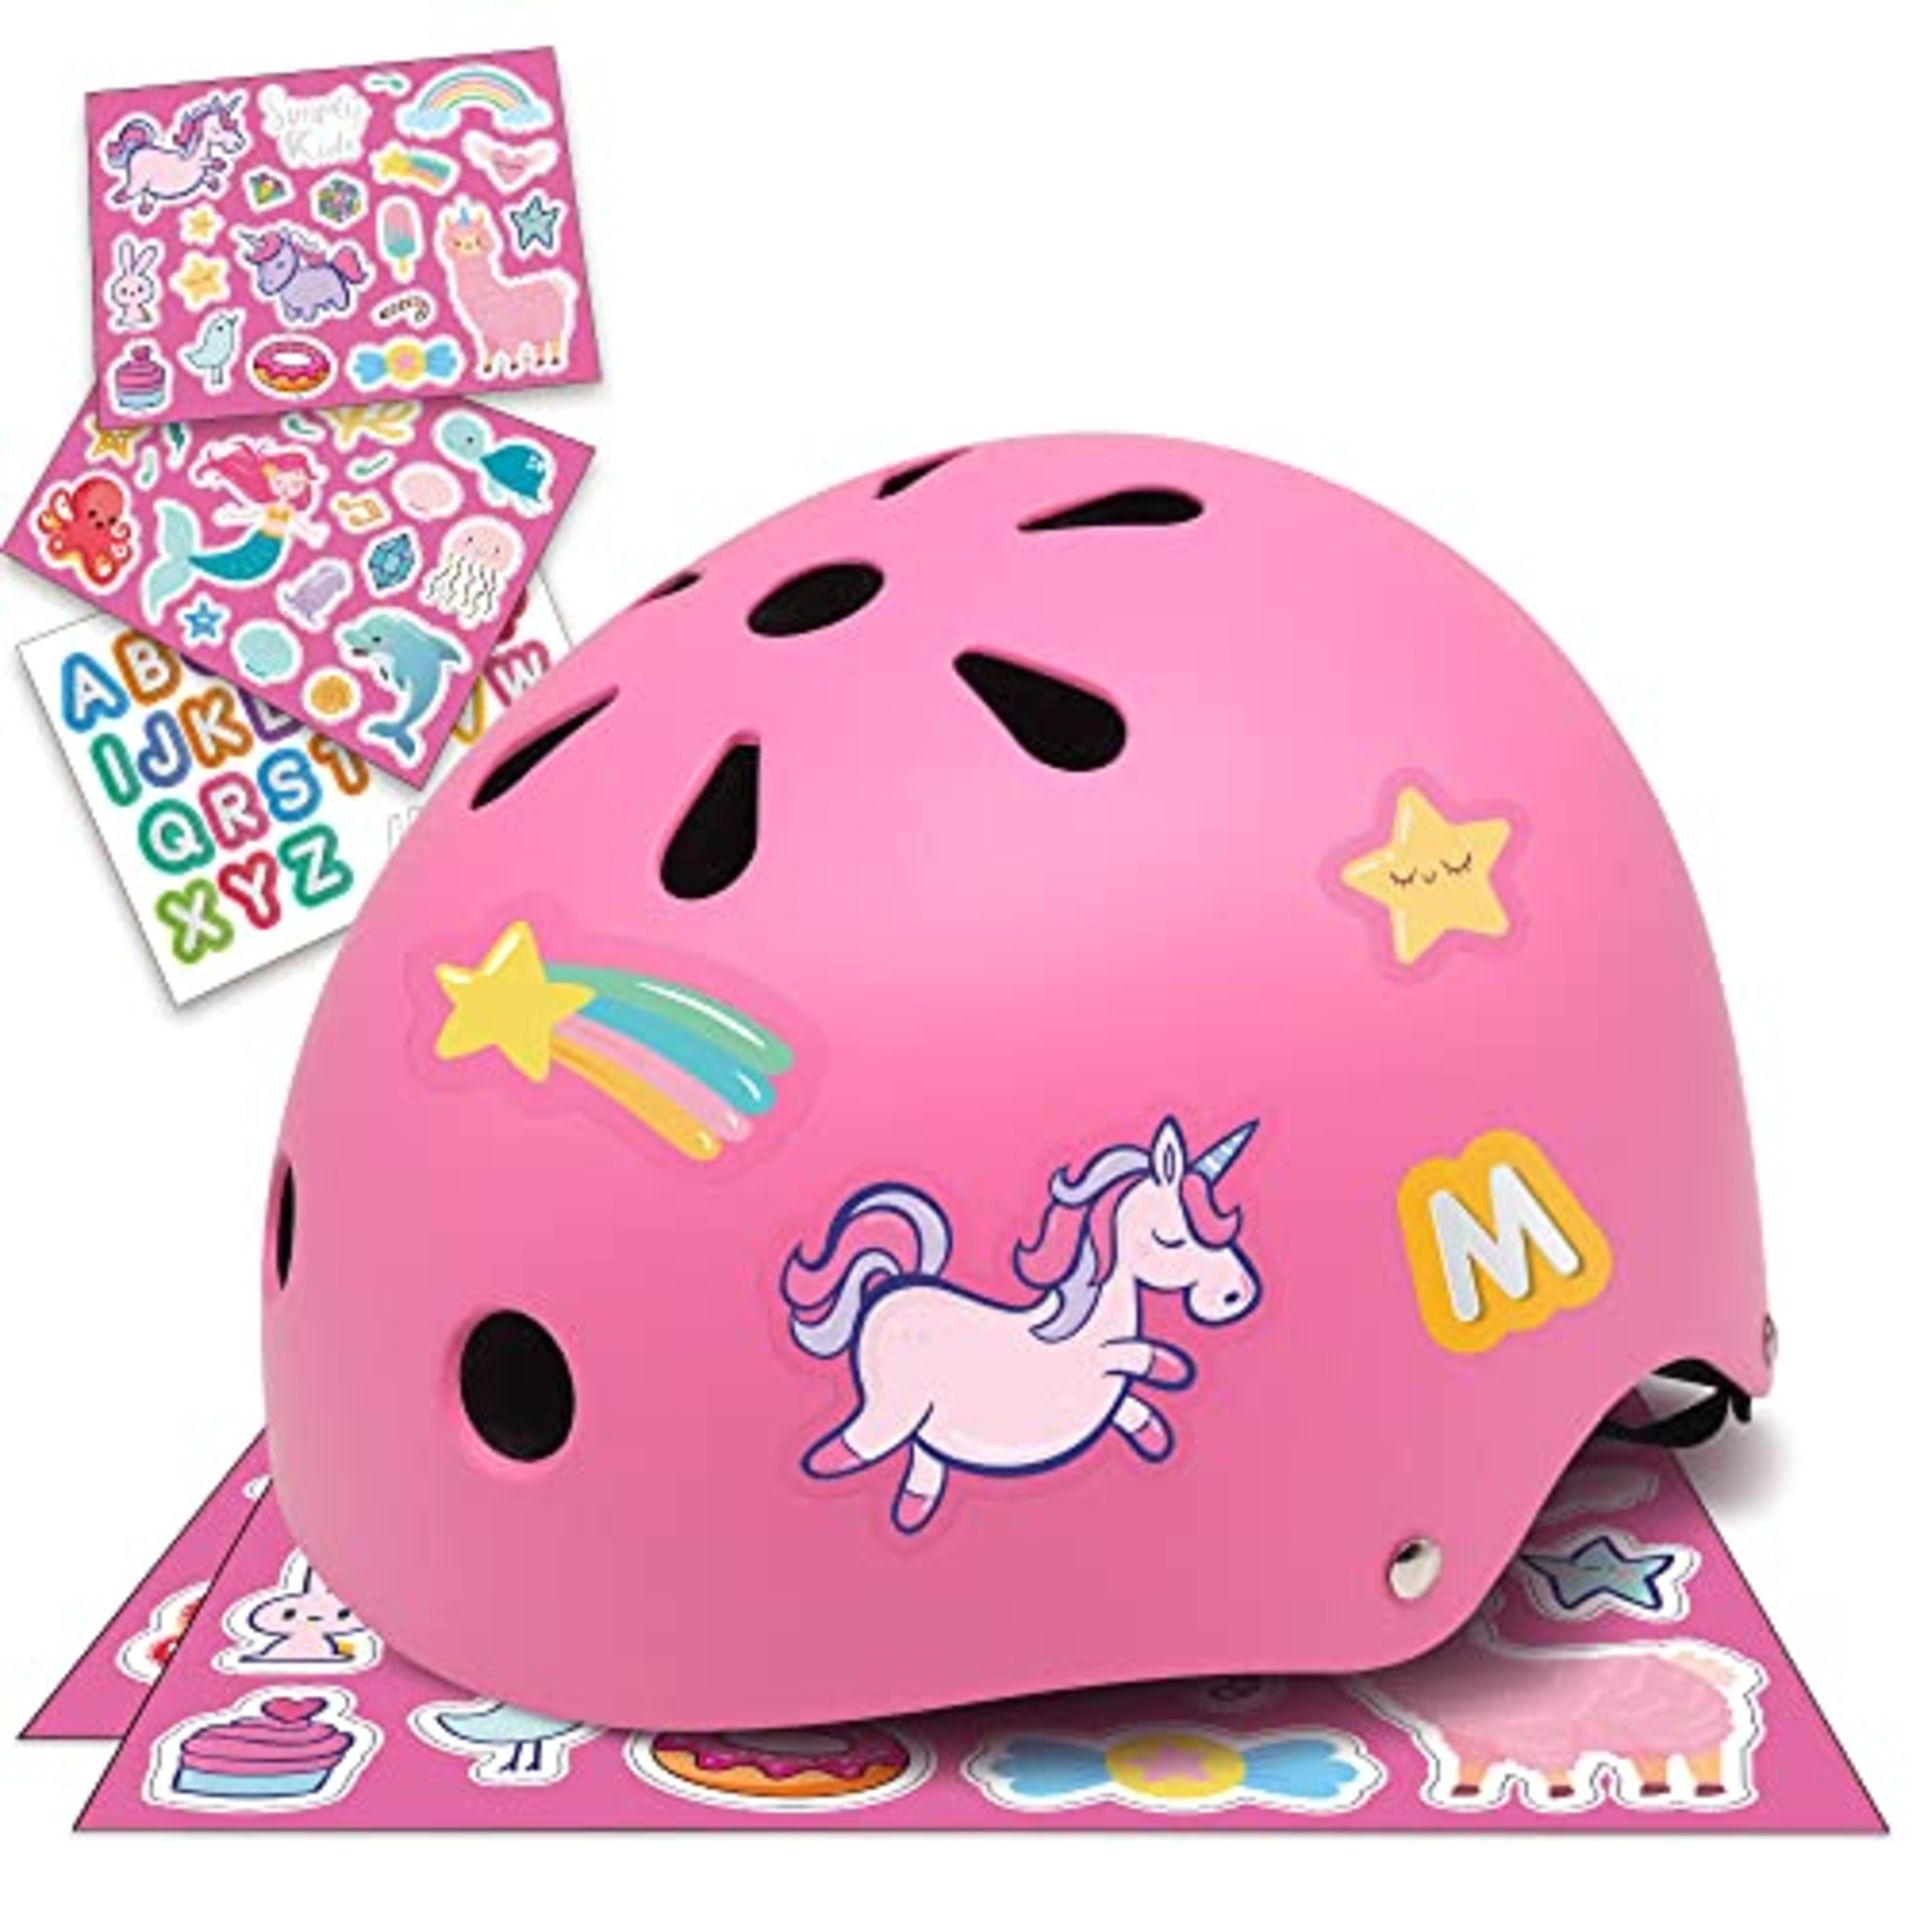 RRP £31.05 Simply Kids Bike Helmet with DIY Stickers for Toddler